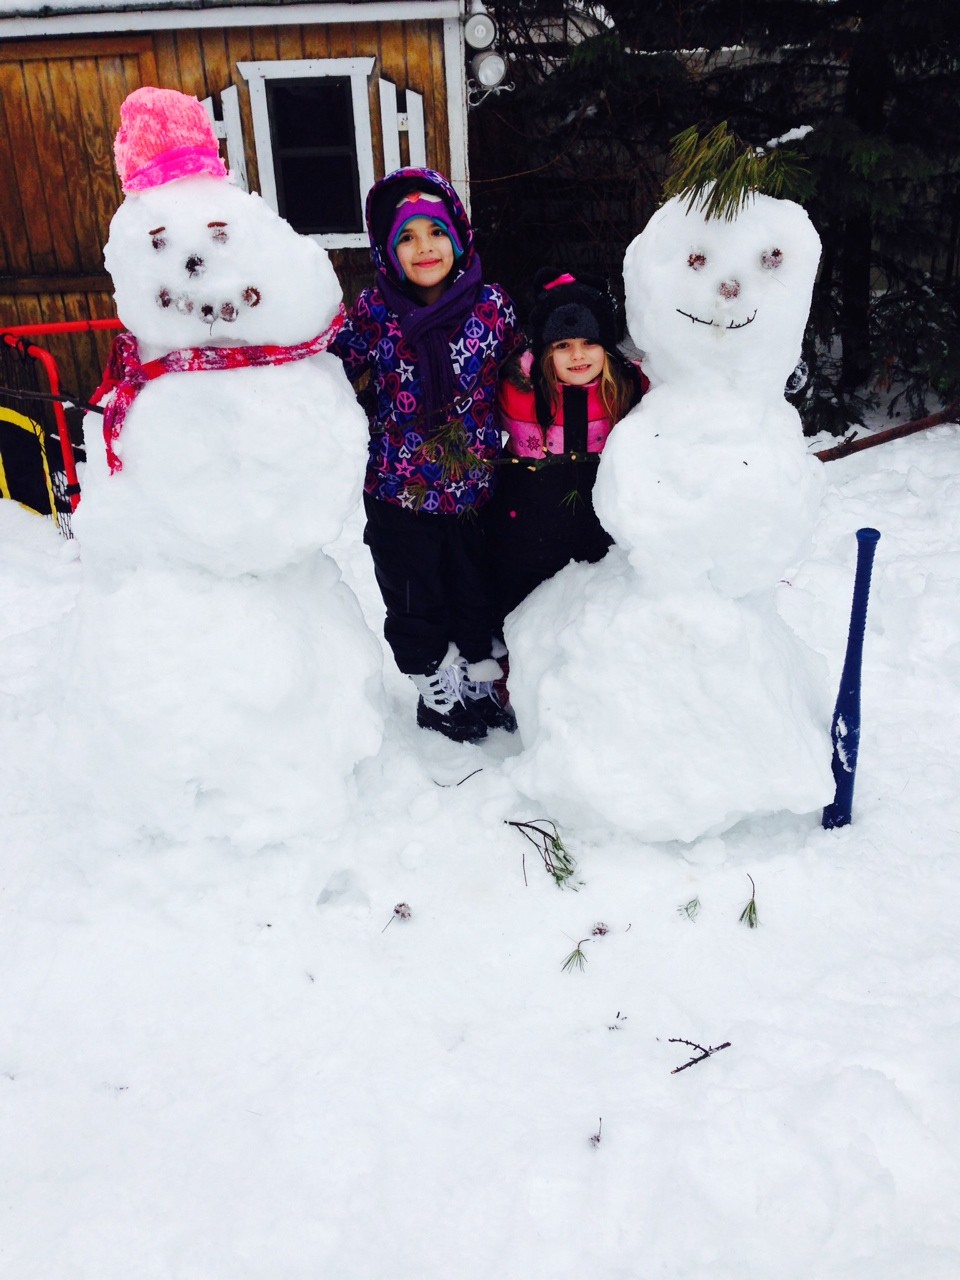 In the Gibson area, Ariel Navarro and Hannah Wallach, both 6, made a snow couple for Valentine's Day.